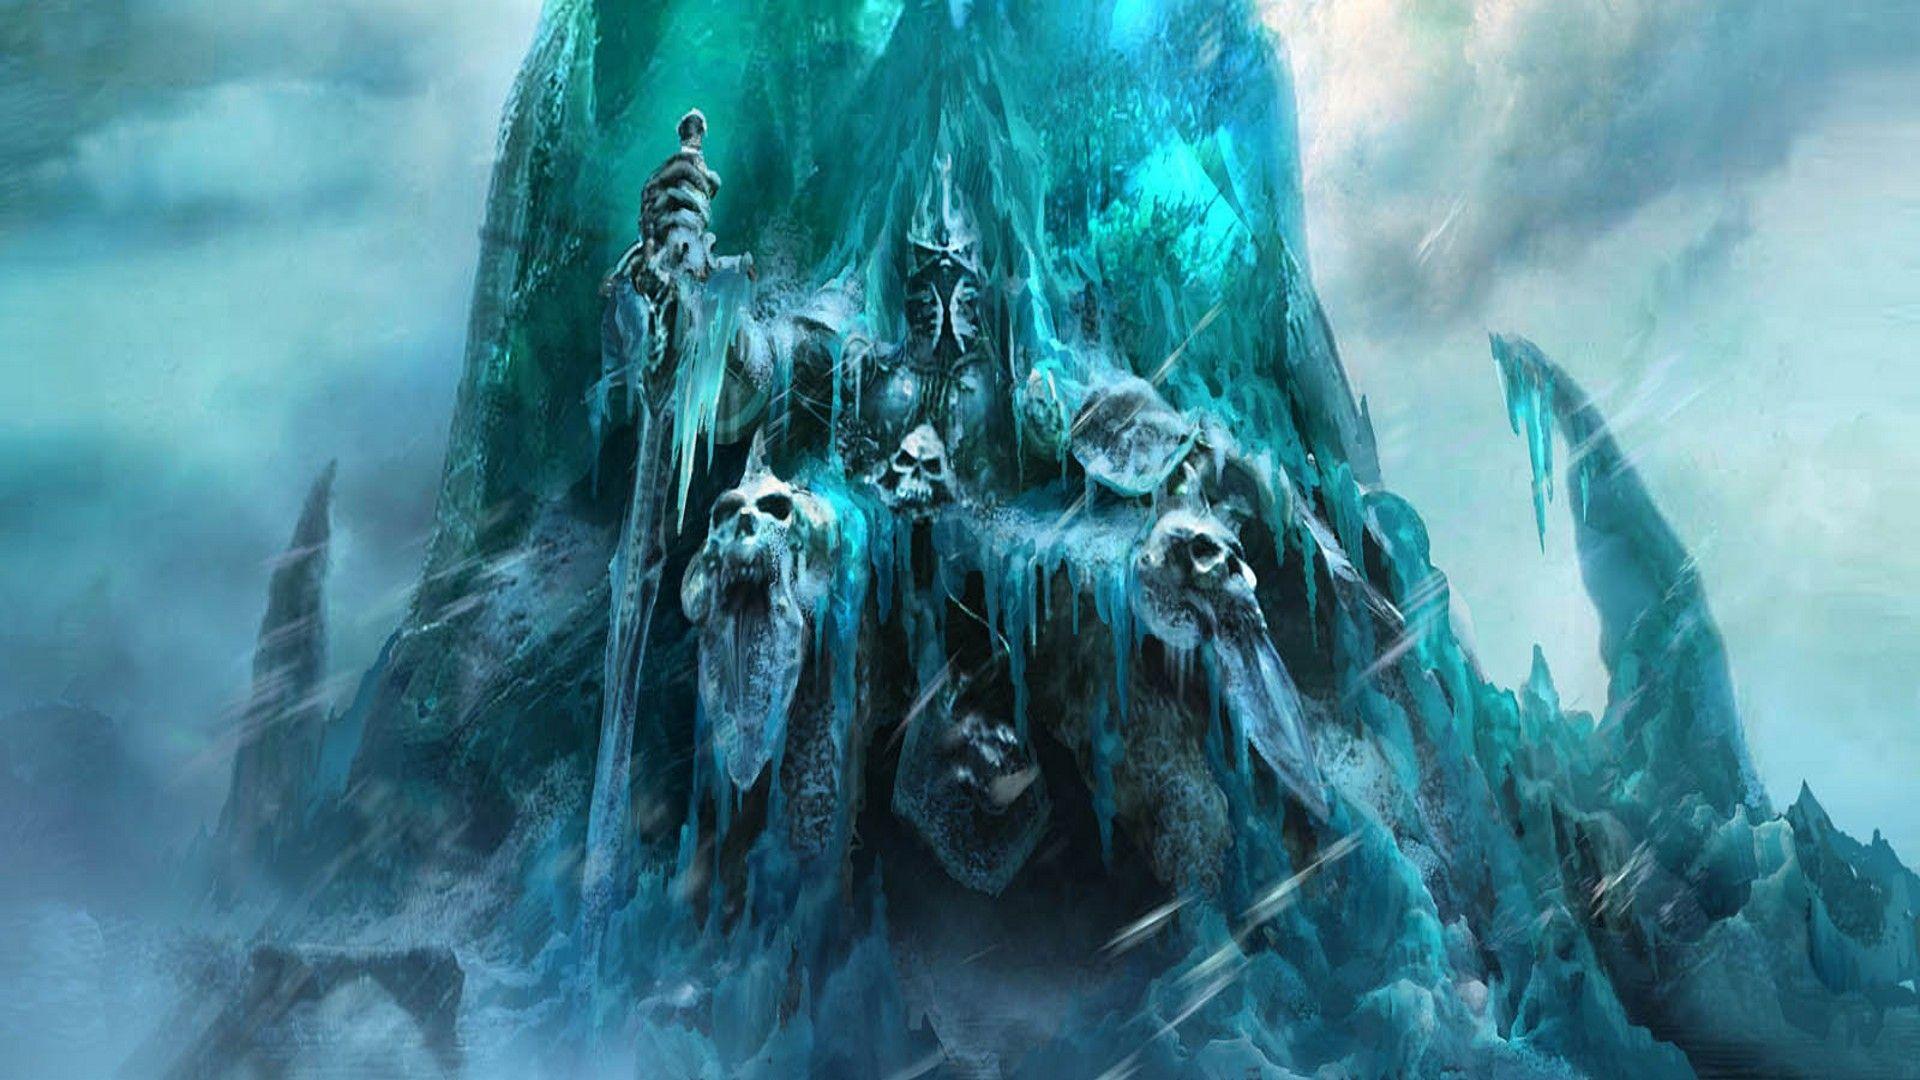 The Lich King Wallpaper